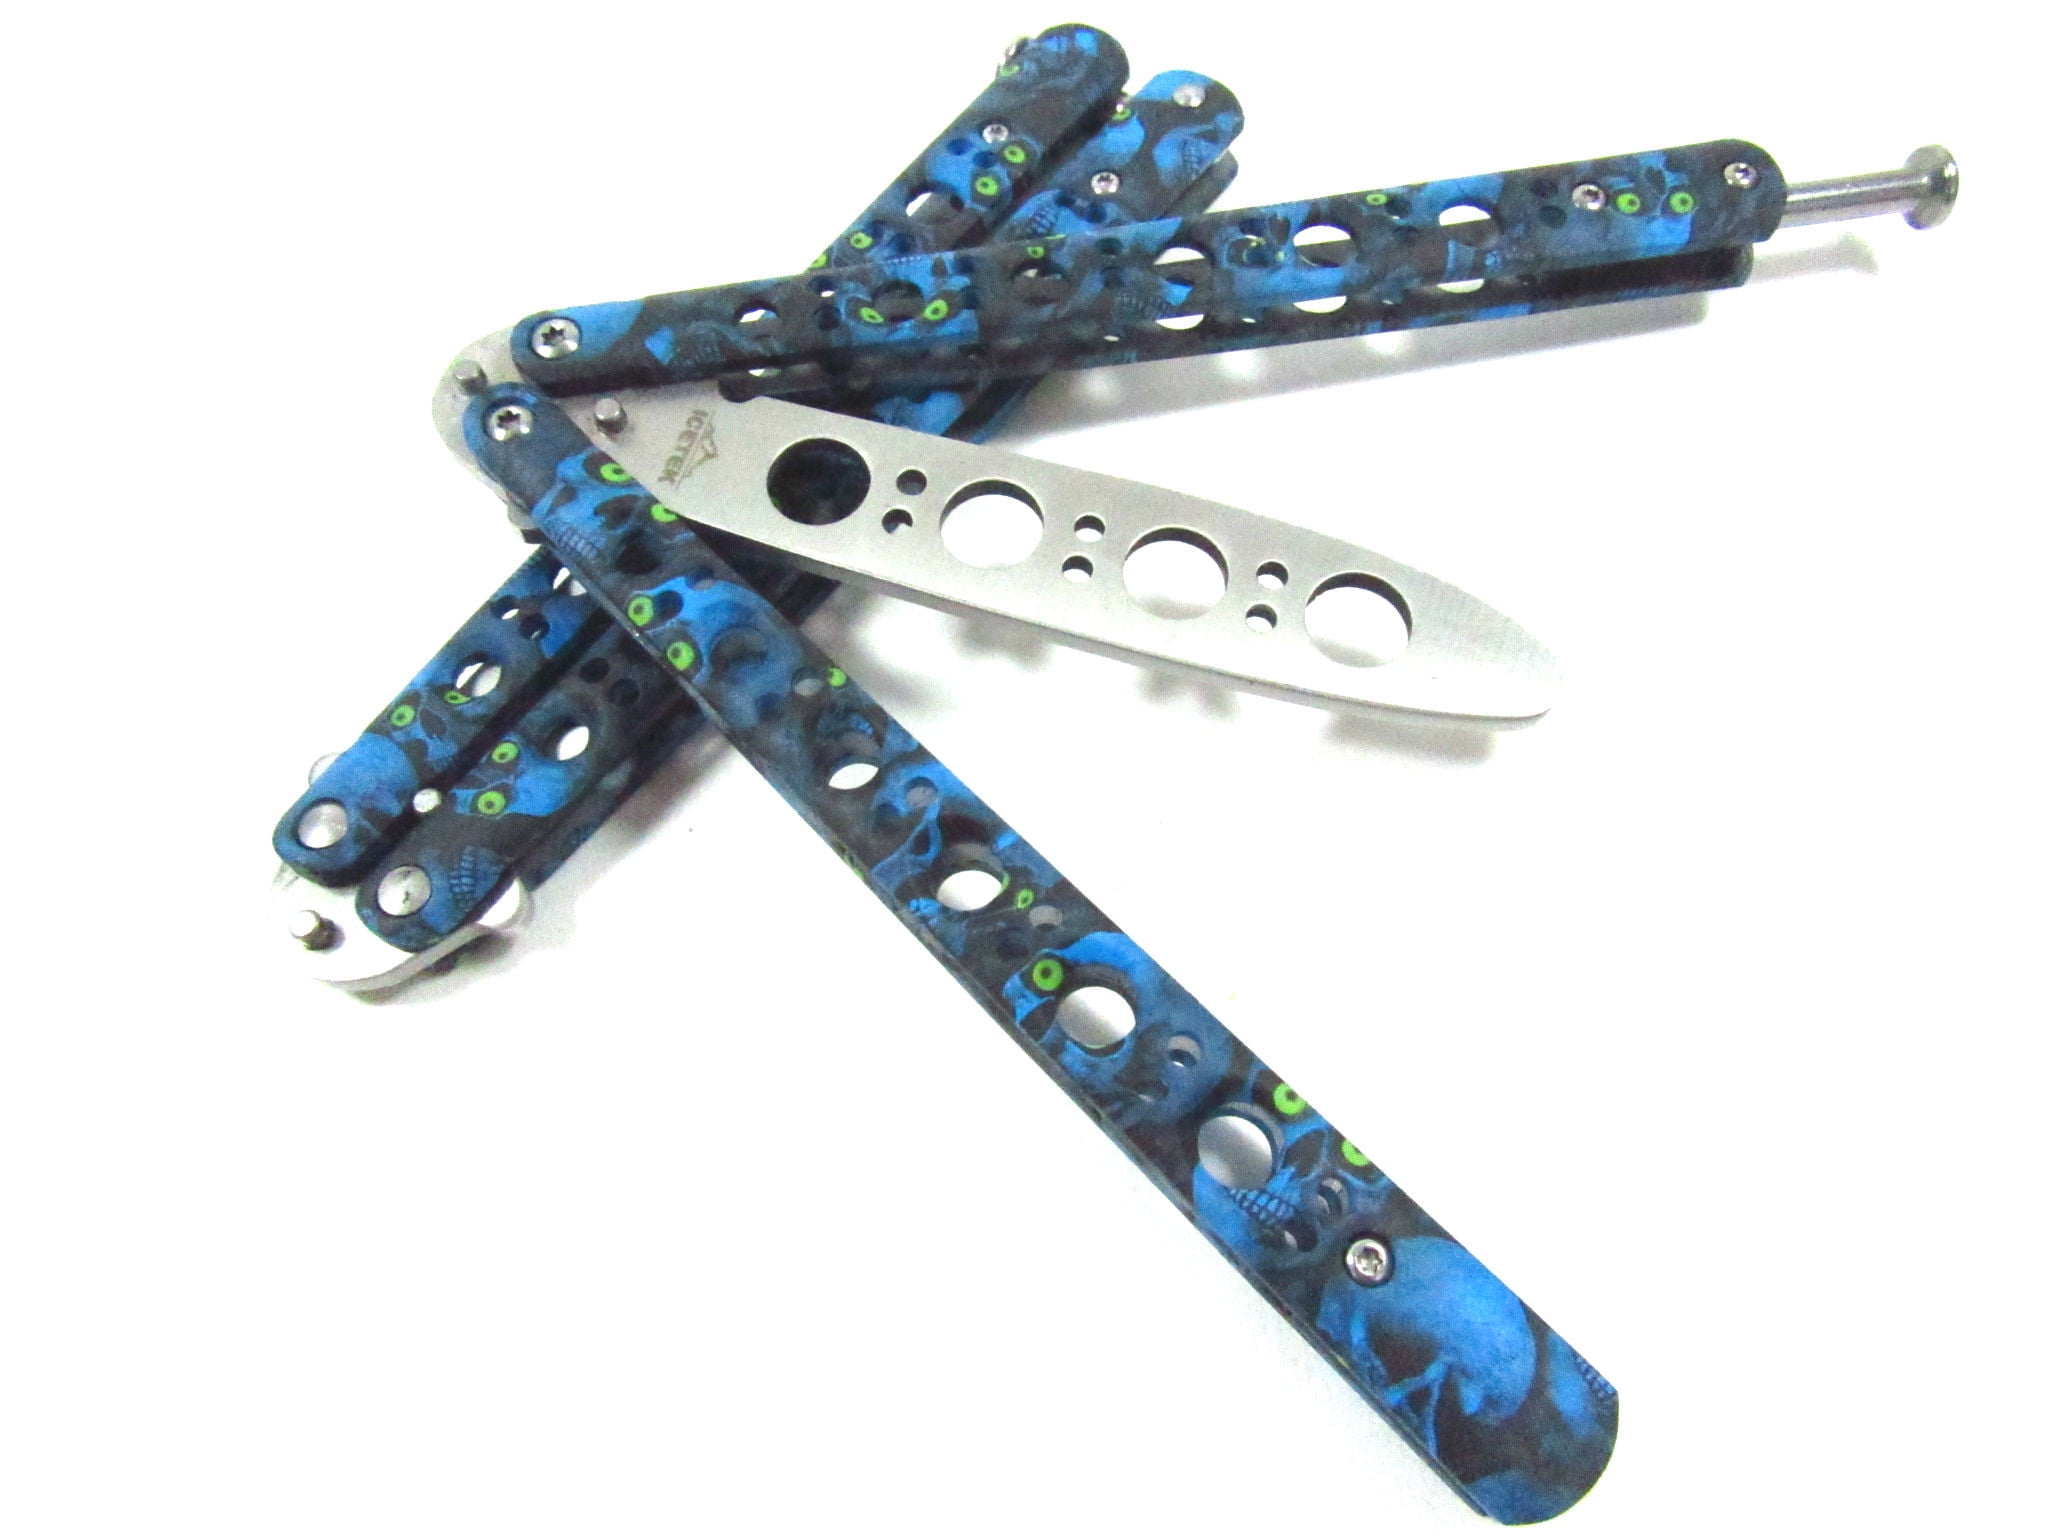 Butterfly Knife Trainer Htomt Gold Stainless Steel Blunt Practice Balisong  DUL for sale online - eBay